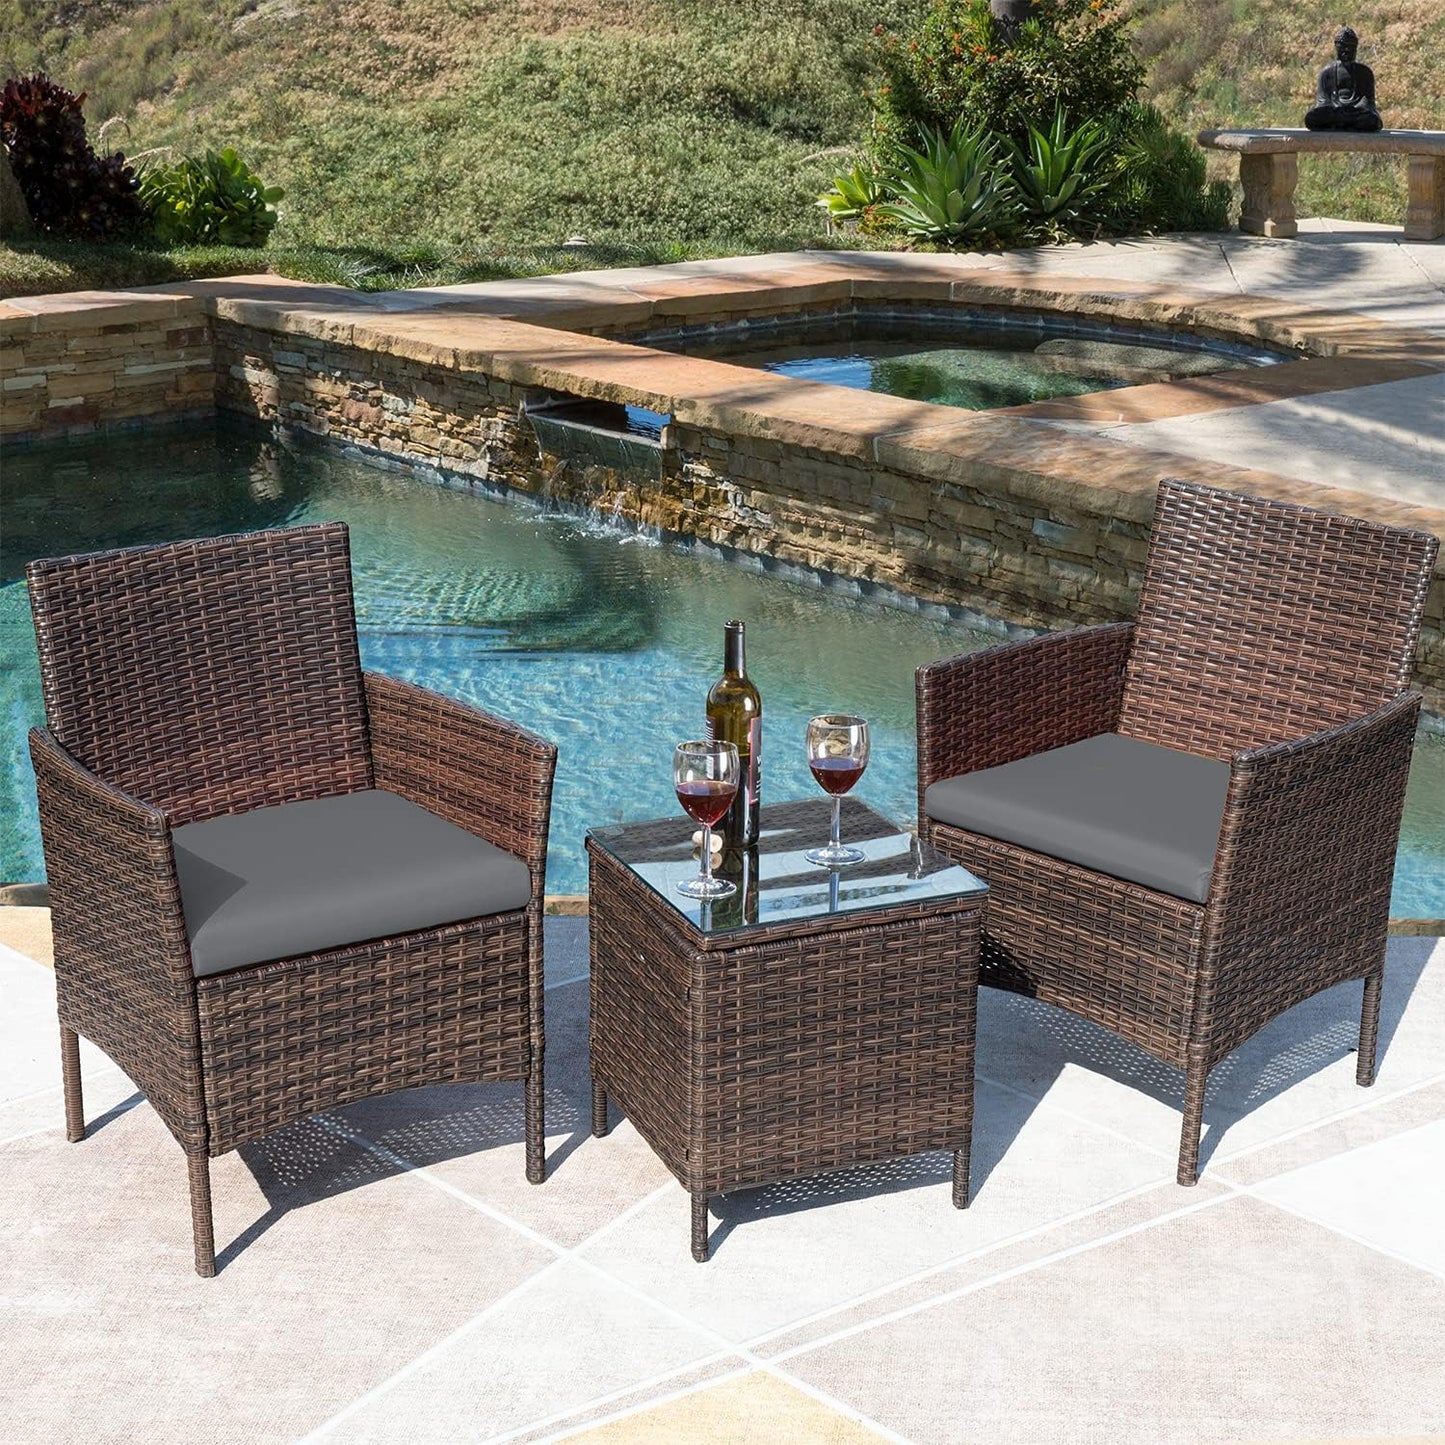 3 Pieces Patio Furniture Sets Outdoor PE Rattan Wicker Chairs with Soft Cushion and Glass Coffee Table for Garden Backyard Porch Poolside, Brown and Gray